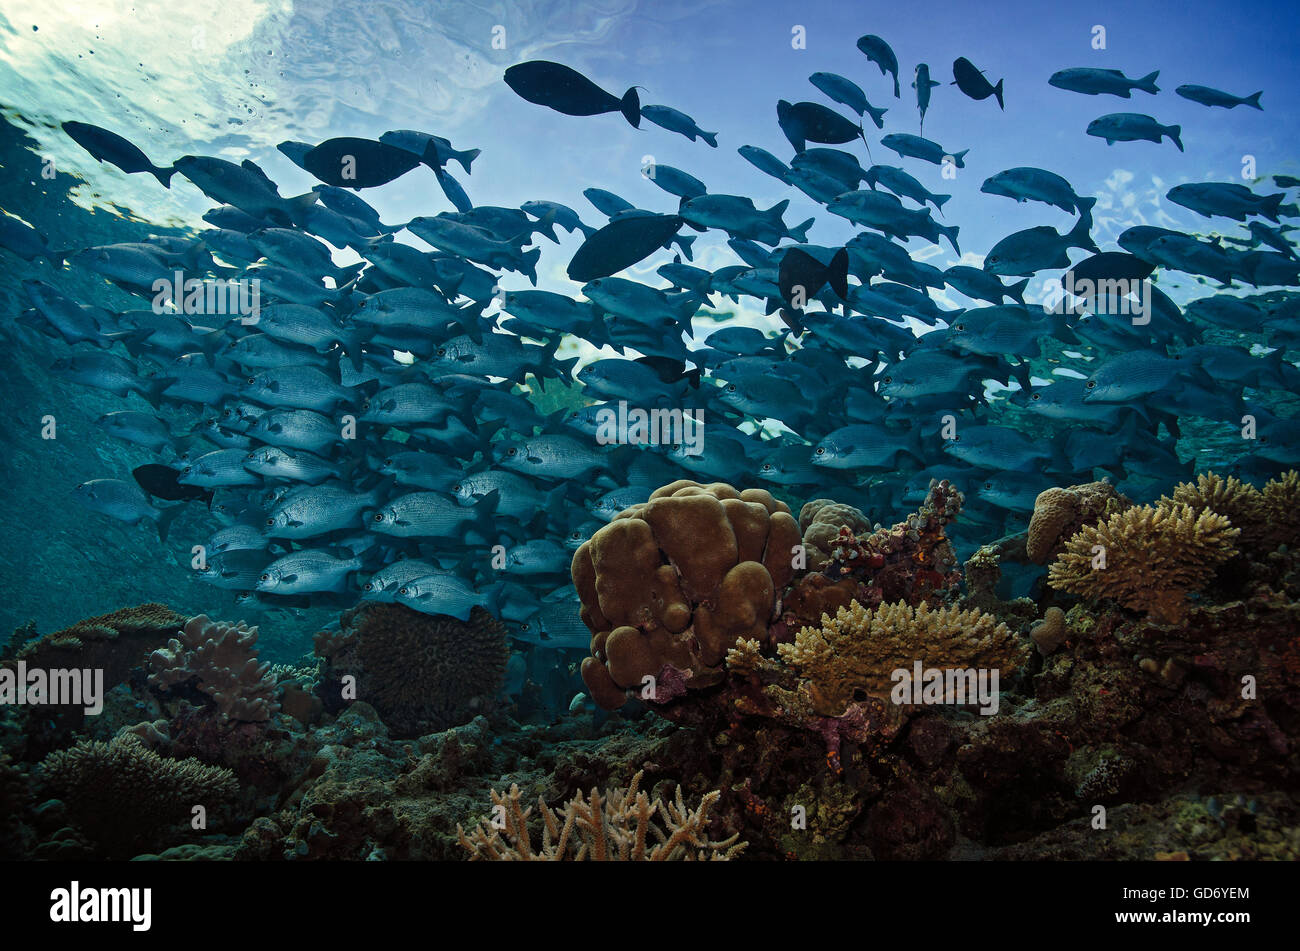 Shoal of Snubnose rudderfish, Kyphosus cinerascens, swimming over the top of a coral reef, Maldives, Indian Ocean Stock Photo